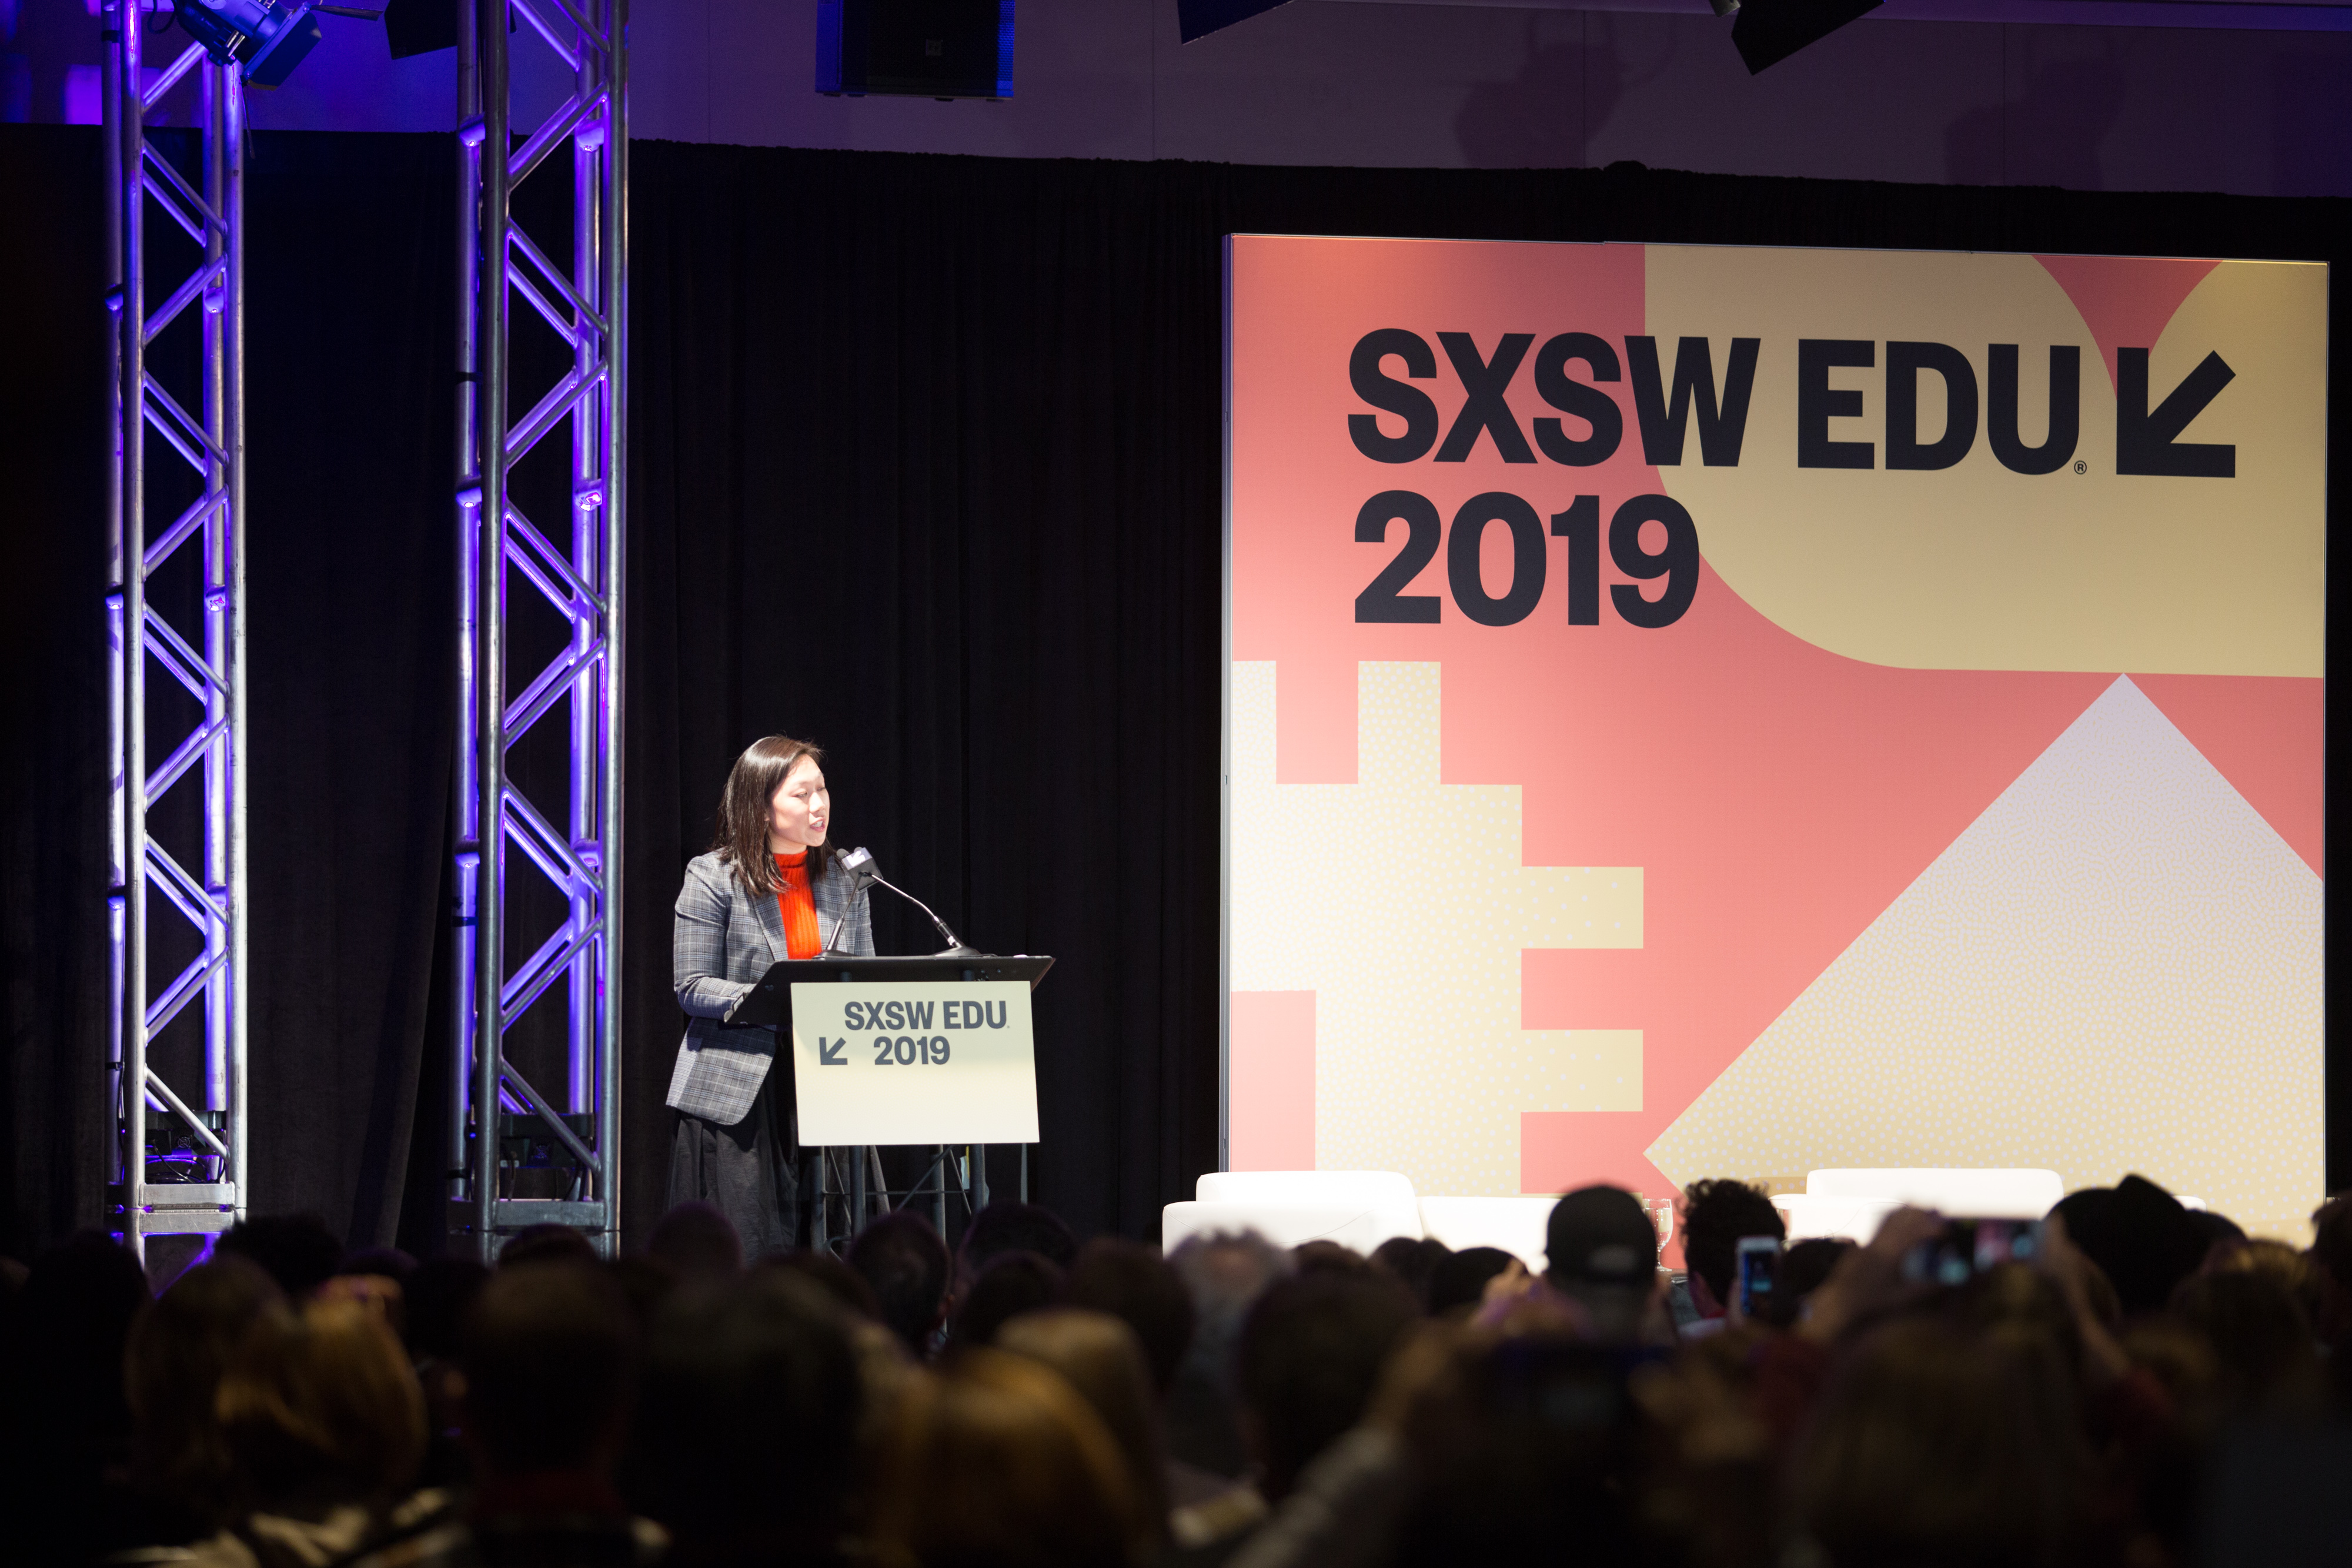 Priscilla Chan Introducing Translating Research into Practice at SXSW EDU 2019. Photo by Sophie Milton.